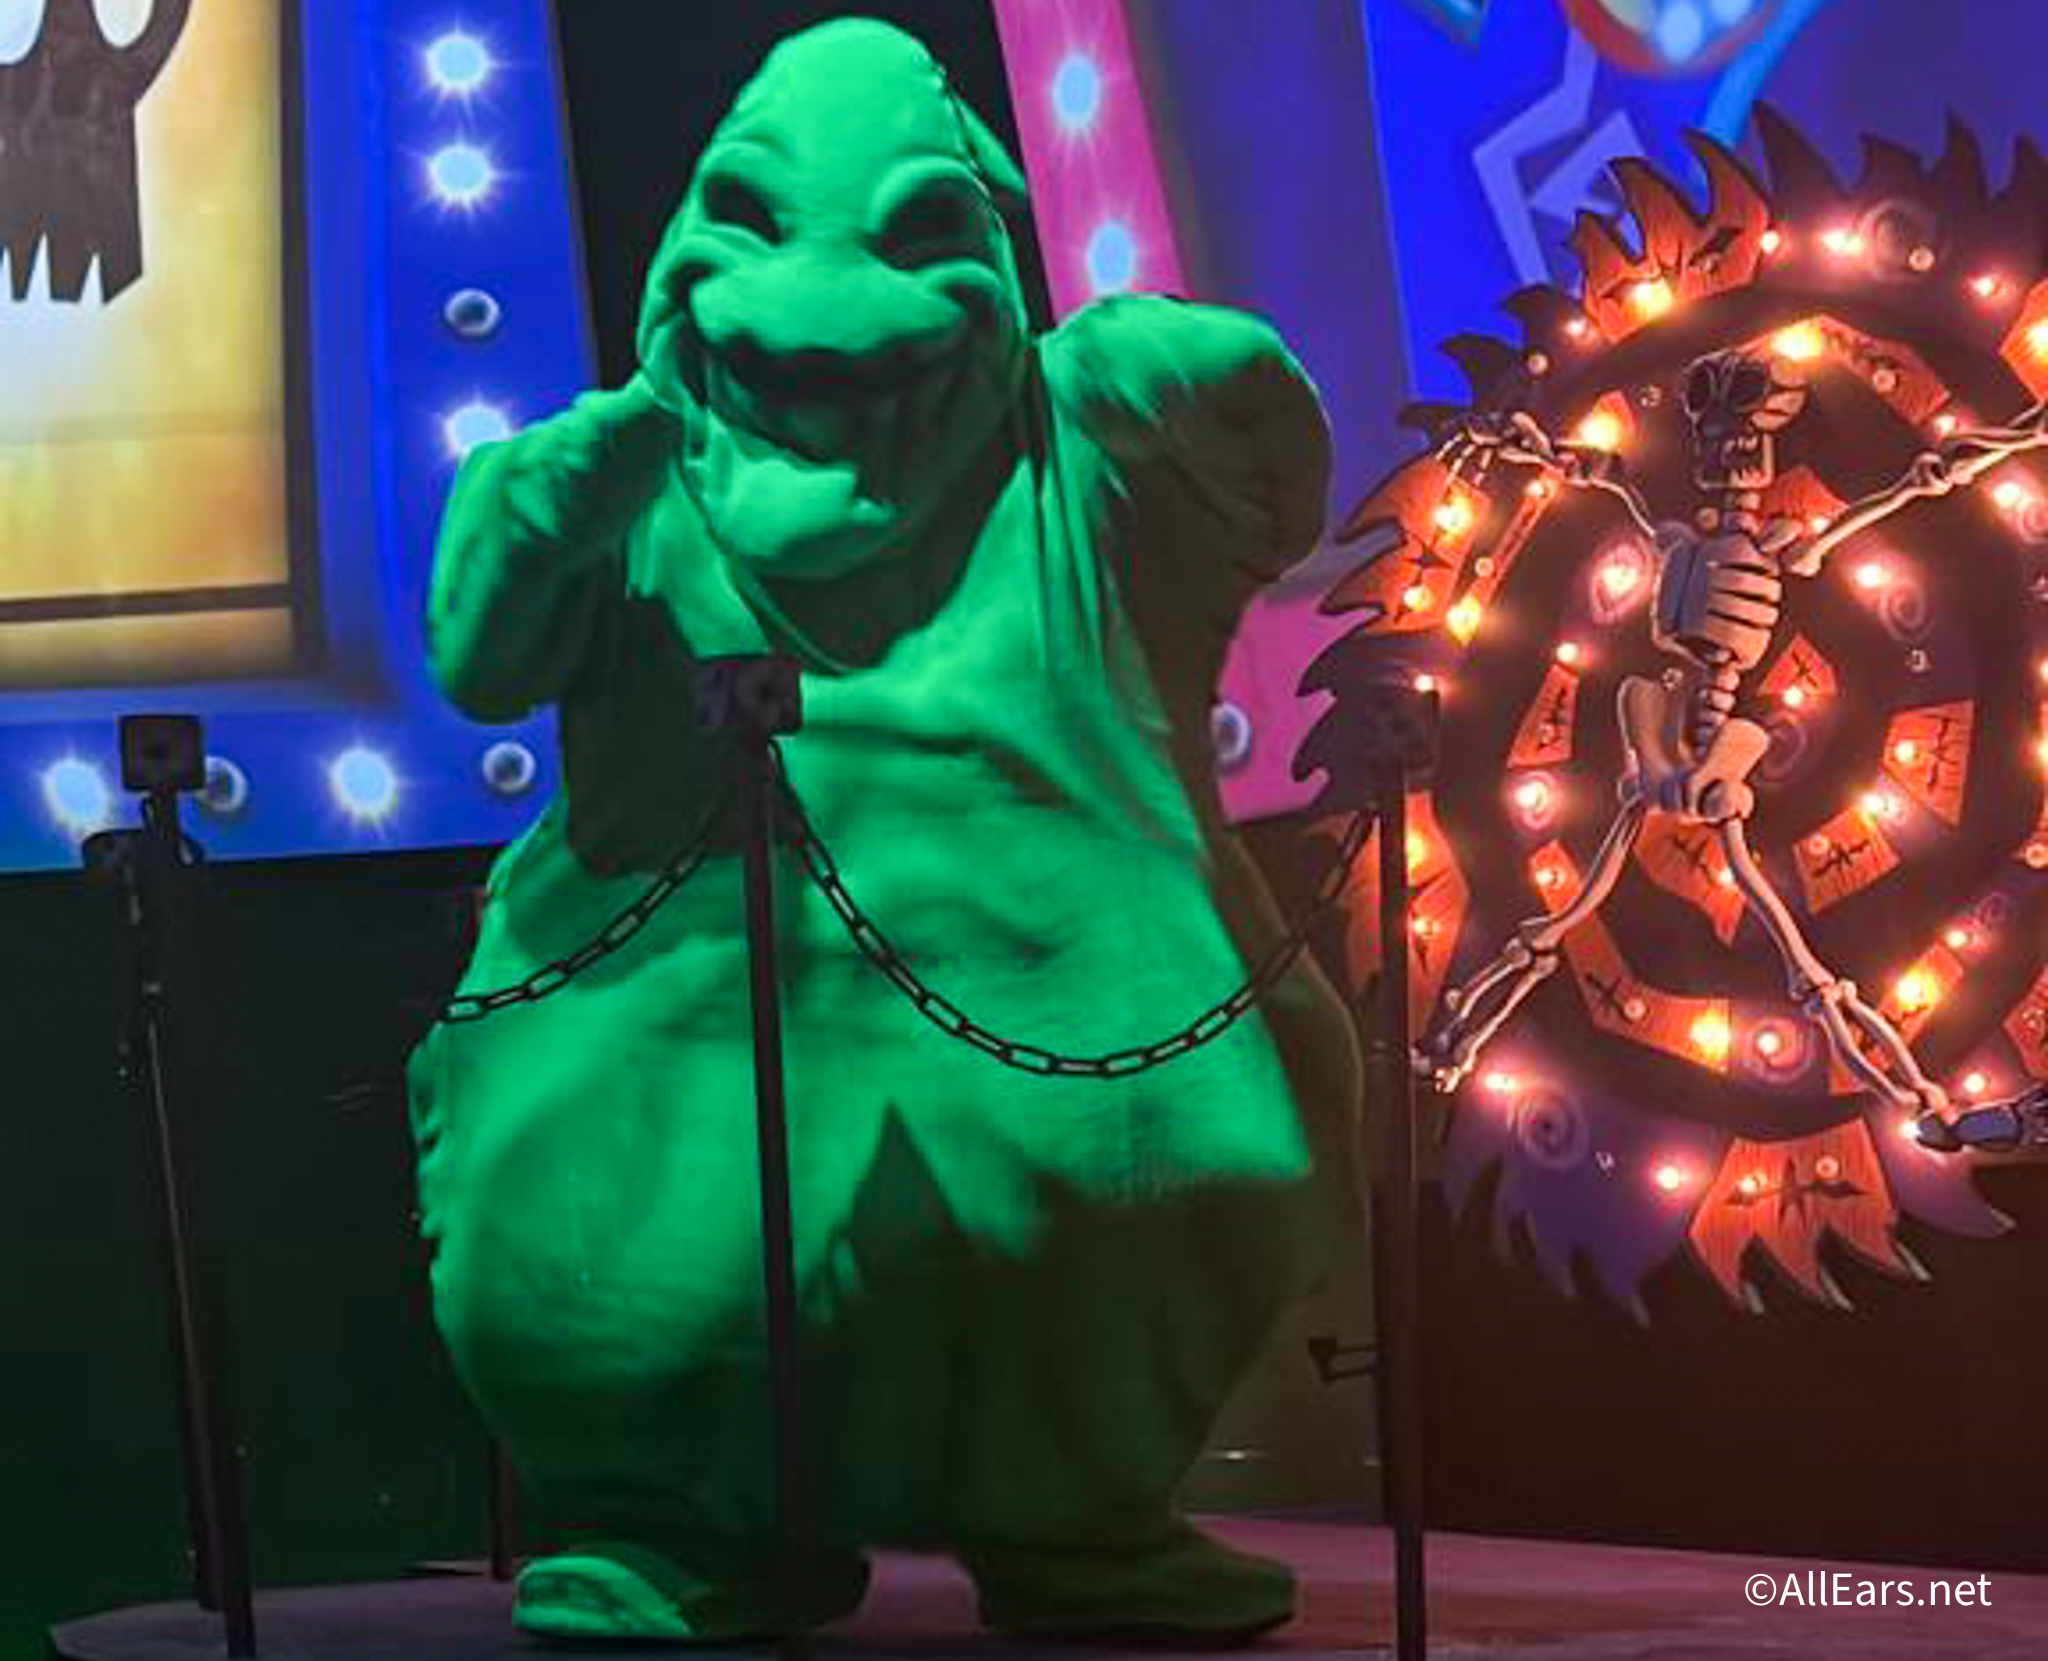 REMINDER Disney's Oogie Boogie Bash Tickets Go on Sale TOMORROW